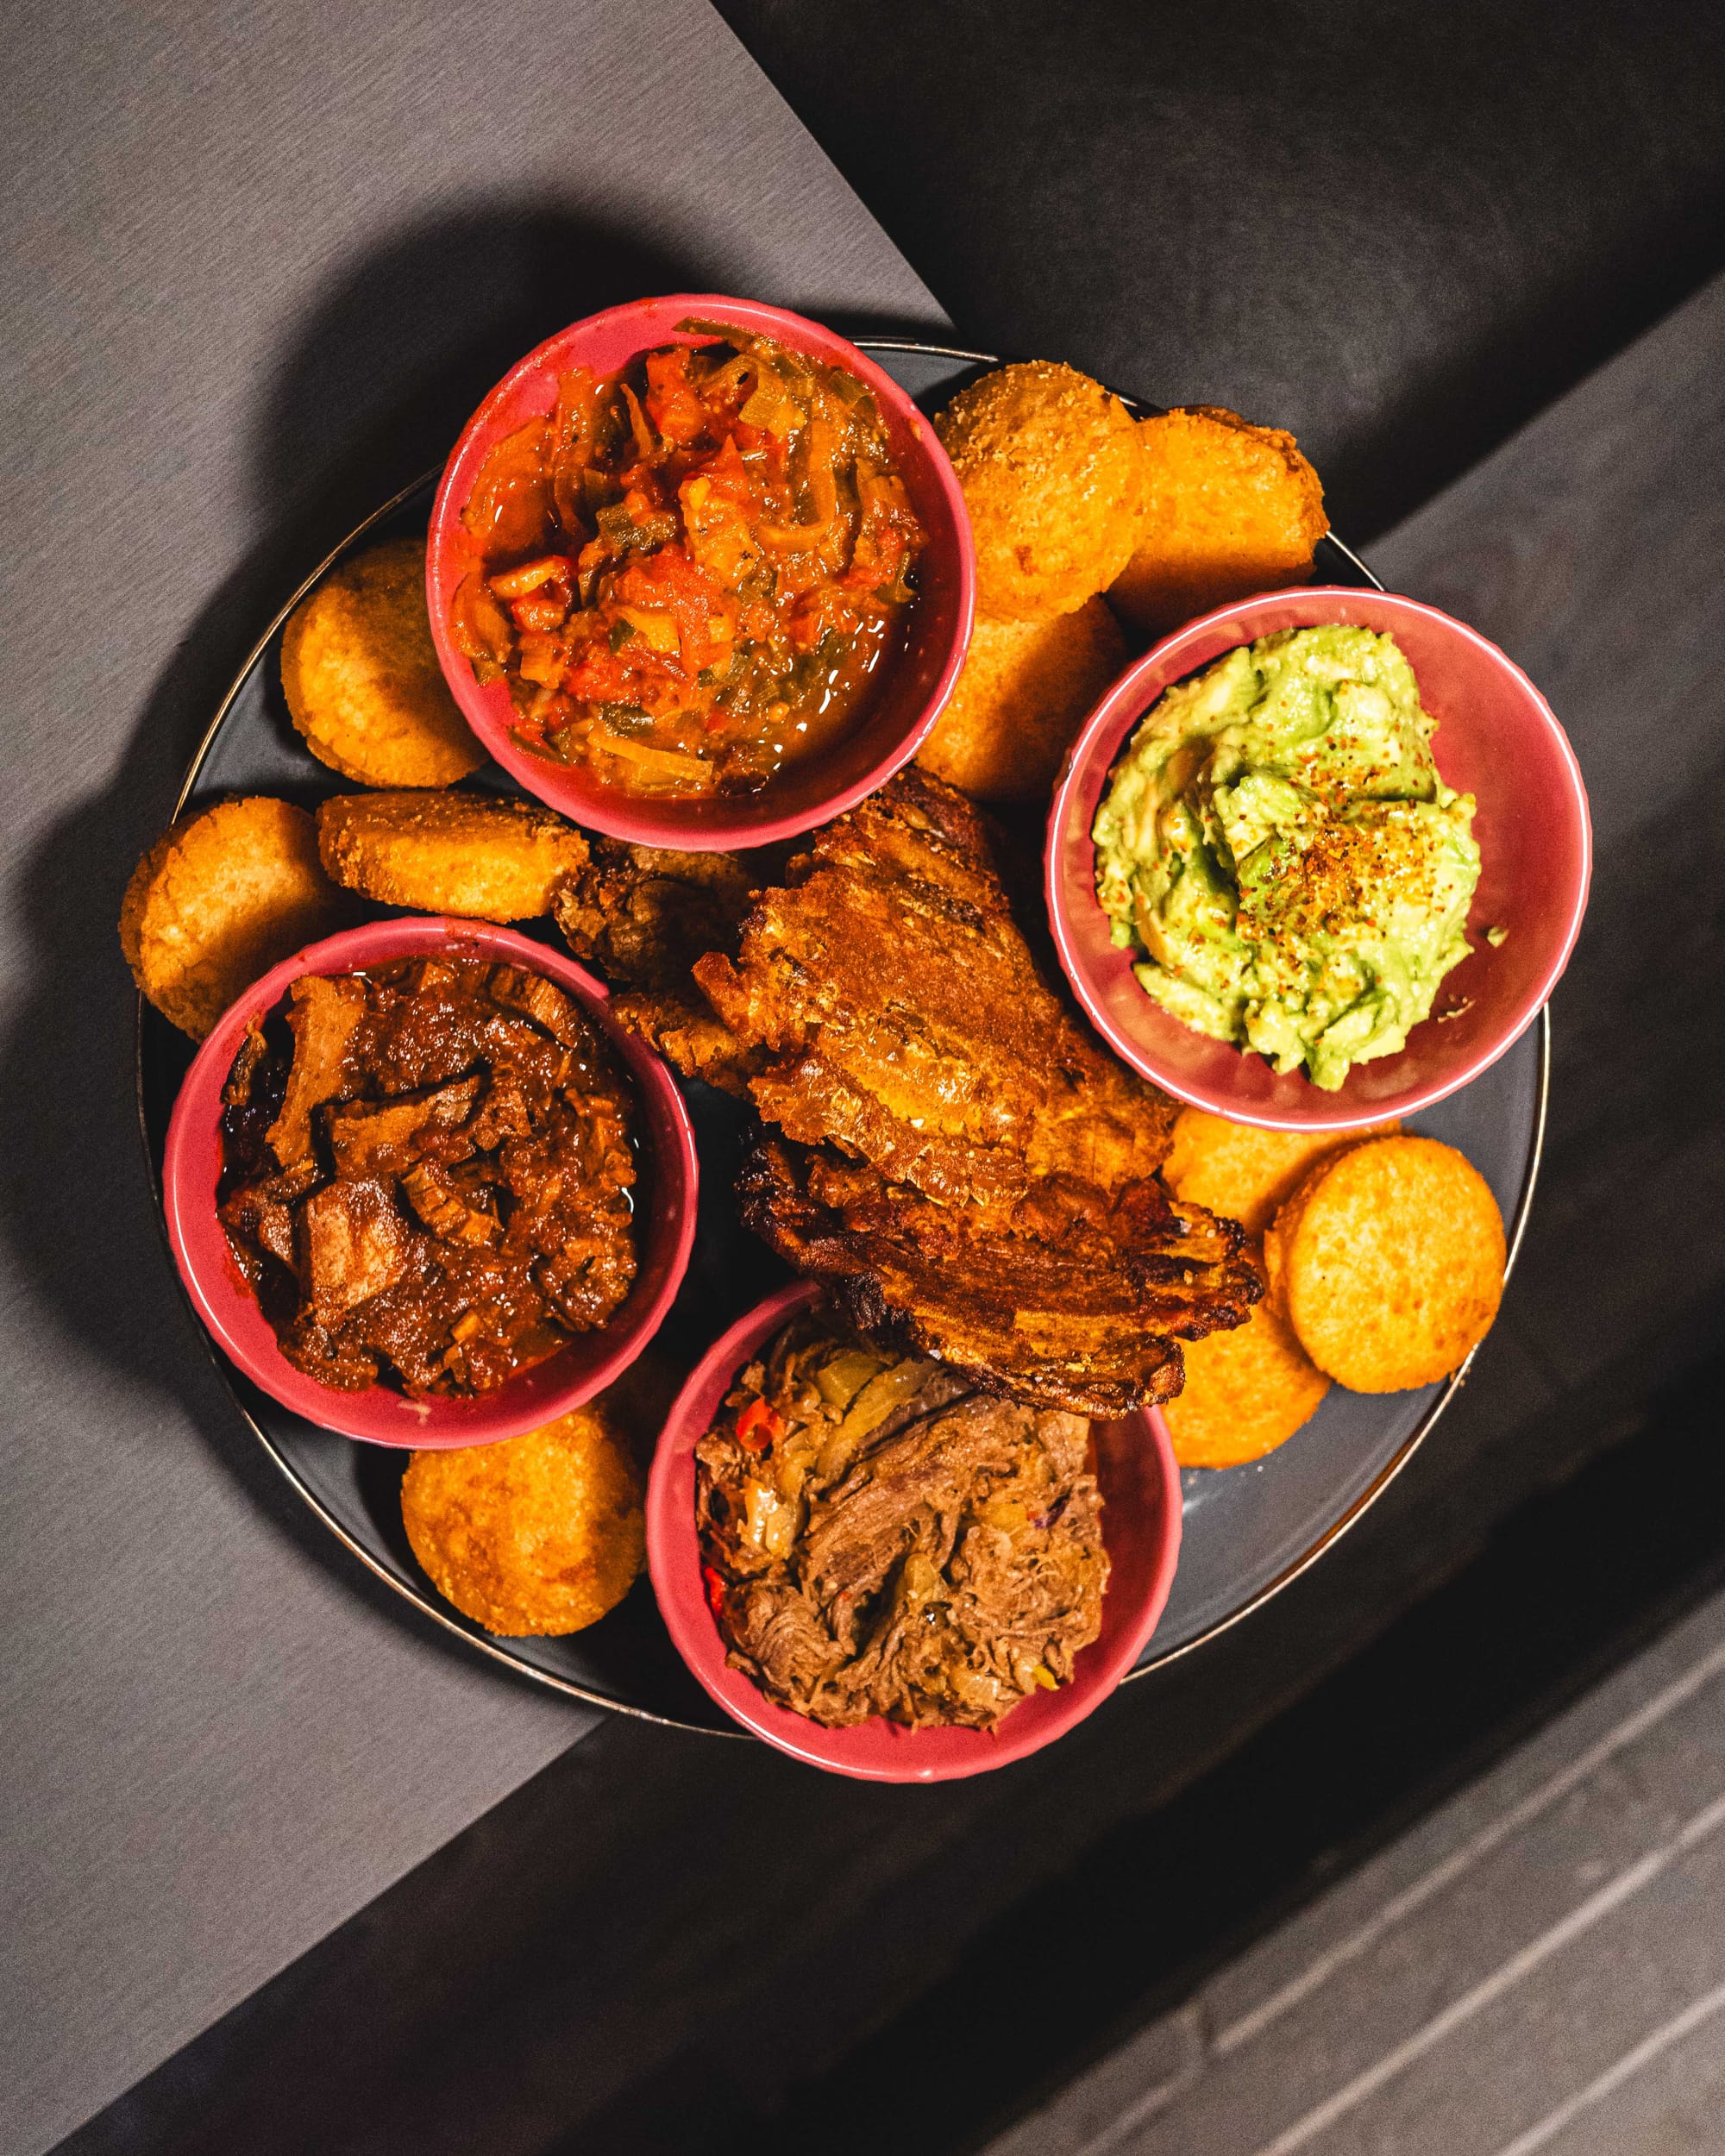 Top down shot of plate with fried plantains, mini arepa, pulled beef, vegetables and avocado